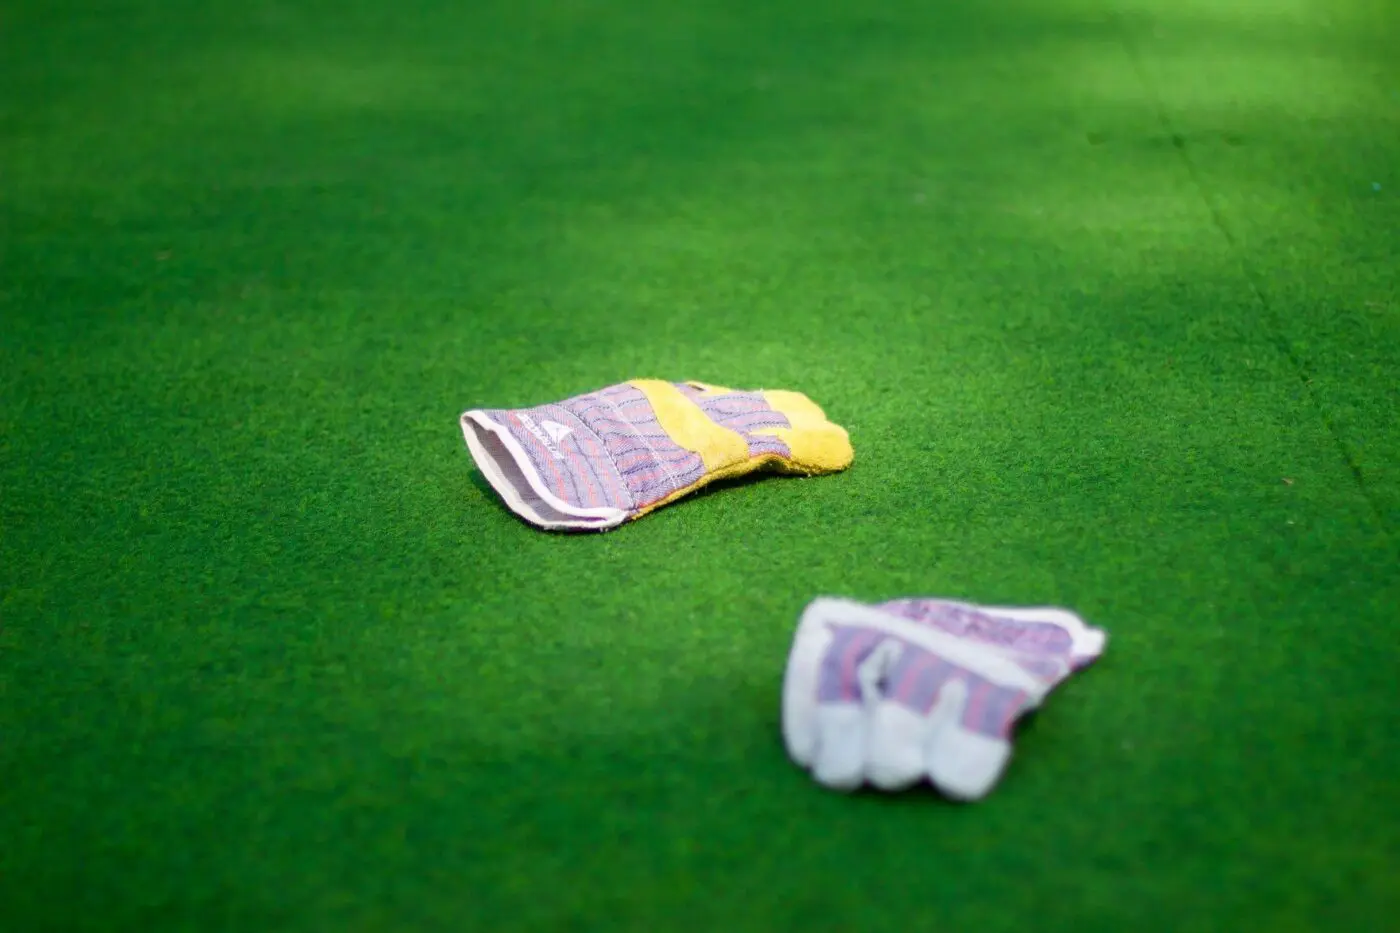 Two gardening gloves lie on a vibrant green lawn reminiscent of a well-maintained sports field astroturf. One glove is slightly closer to the foreground, with both gloves showing a mix of purple, yellow, and white colors. The scene is brightly lit, highlighting the gloves against the lush grass background.